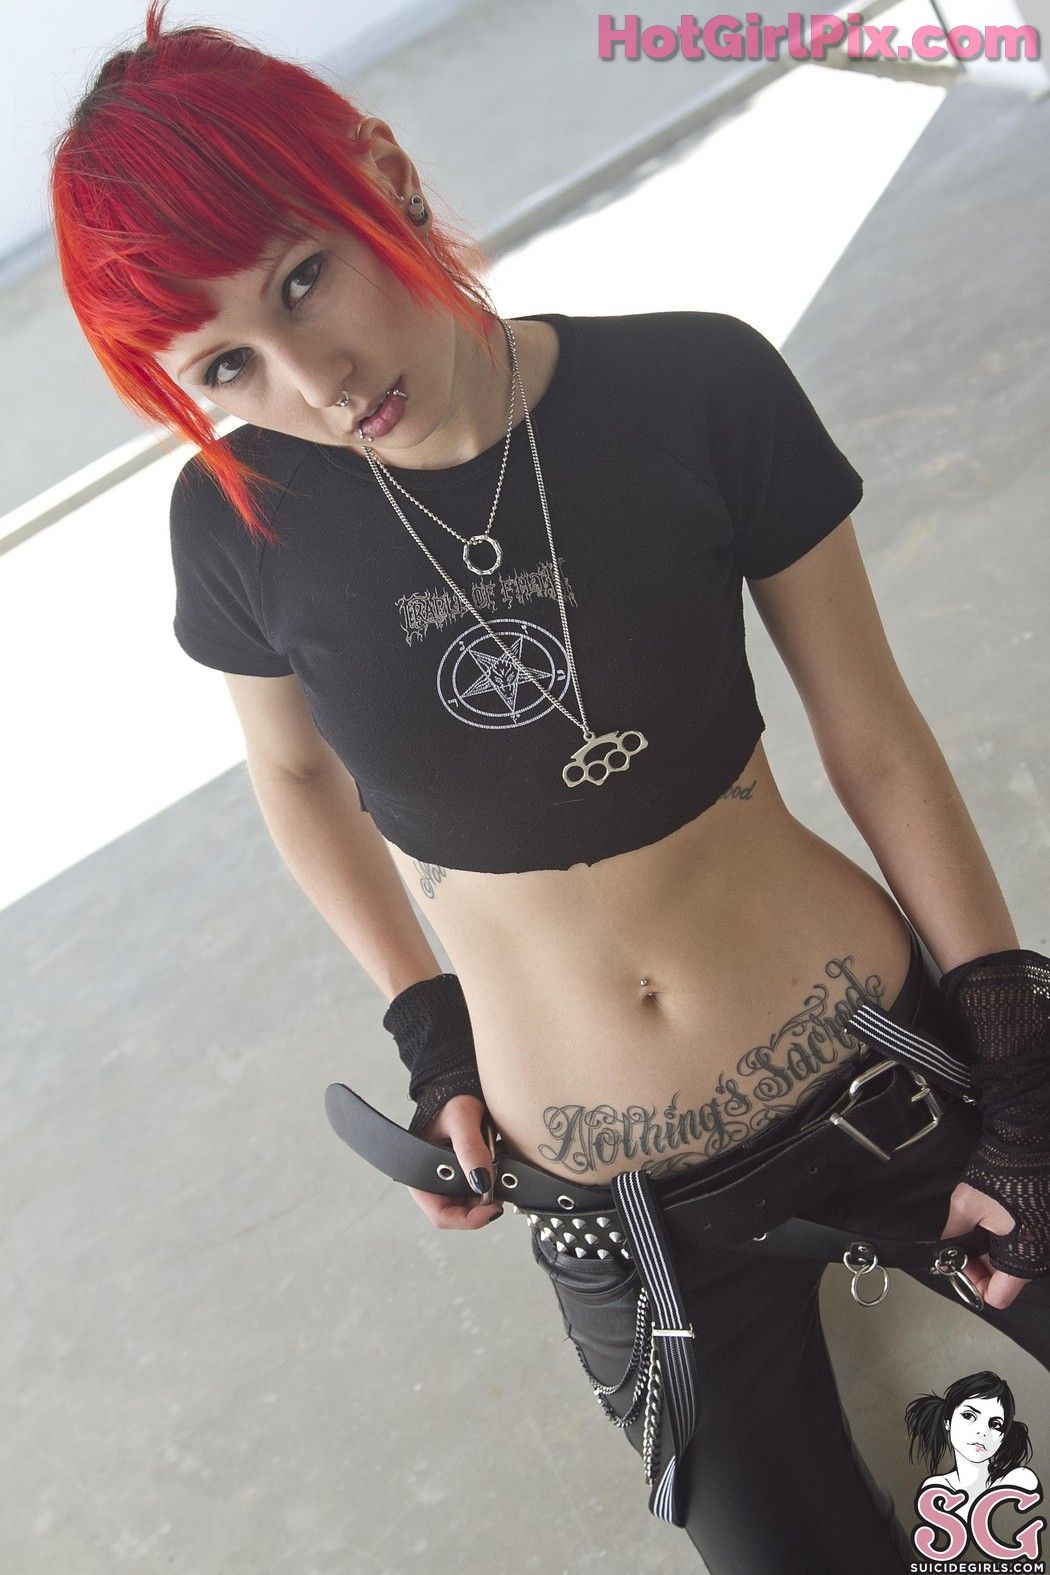 [Suicide Girls] Discordia - Go With the Flow